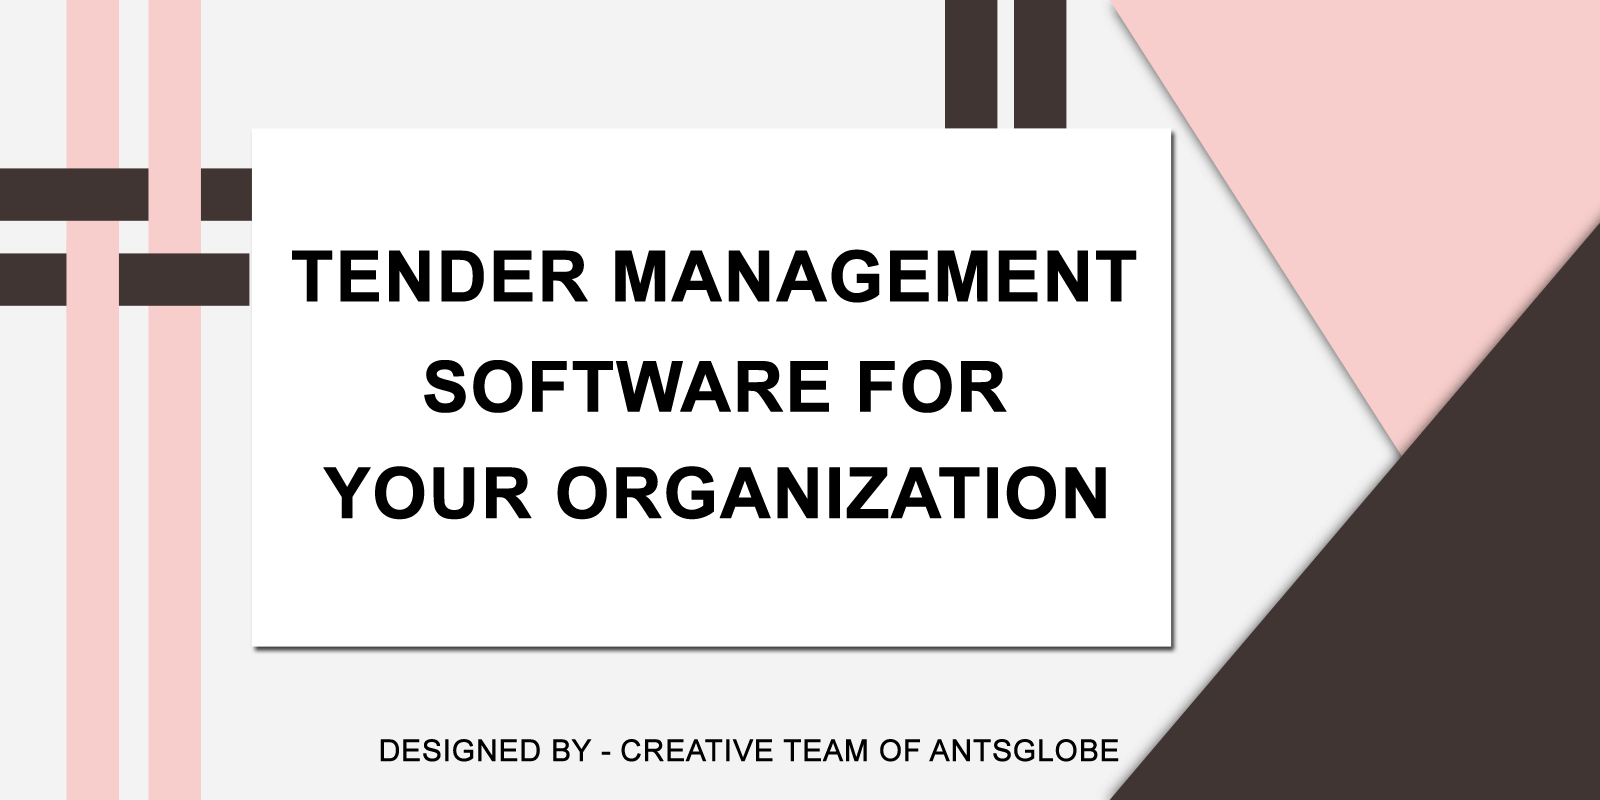 how-tender-management-software is-proving-a-boon-for-organizations